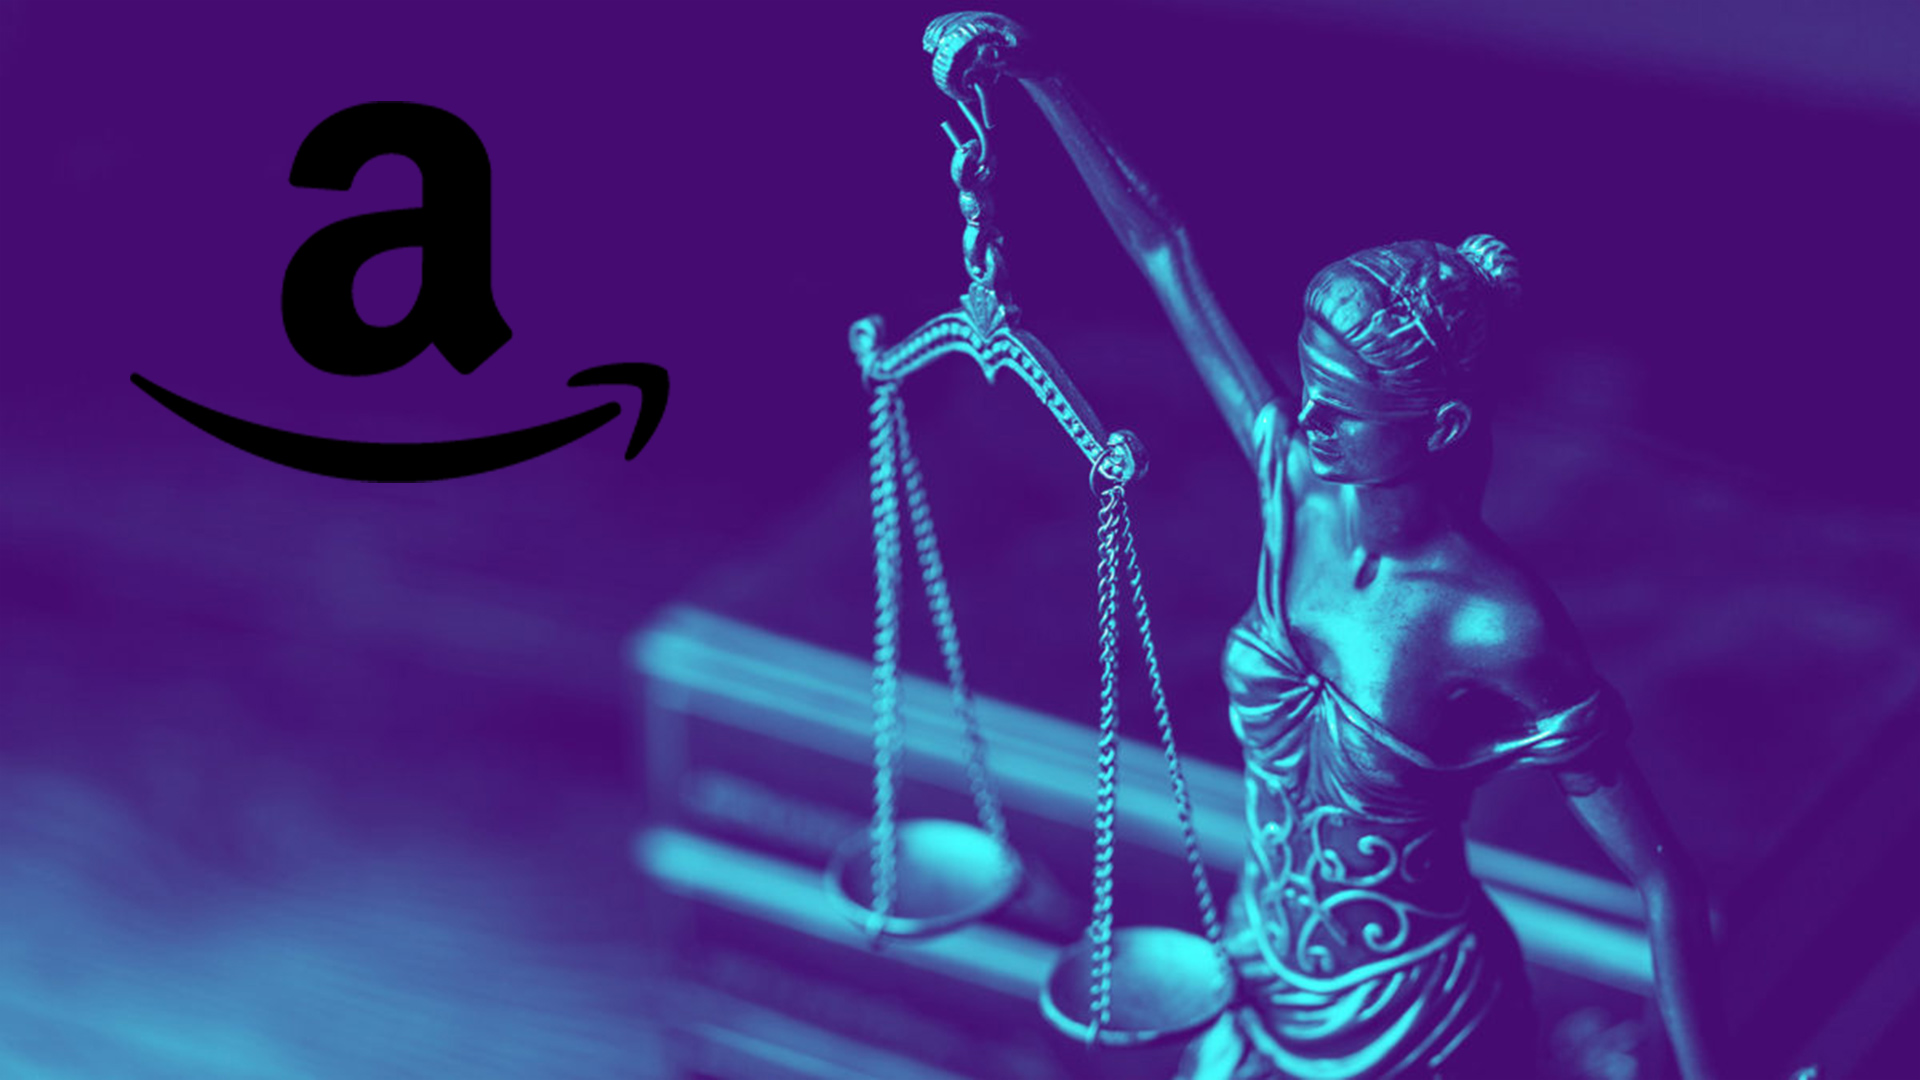 The seventh paragraph of the new Terms of Service highlights your responsibility as an Amazon seller to ensure that your products are not infringing upon any intellectual property rights of another person.